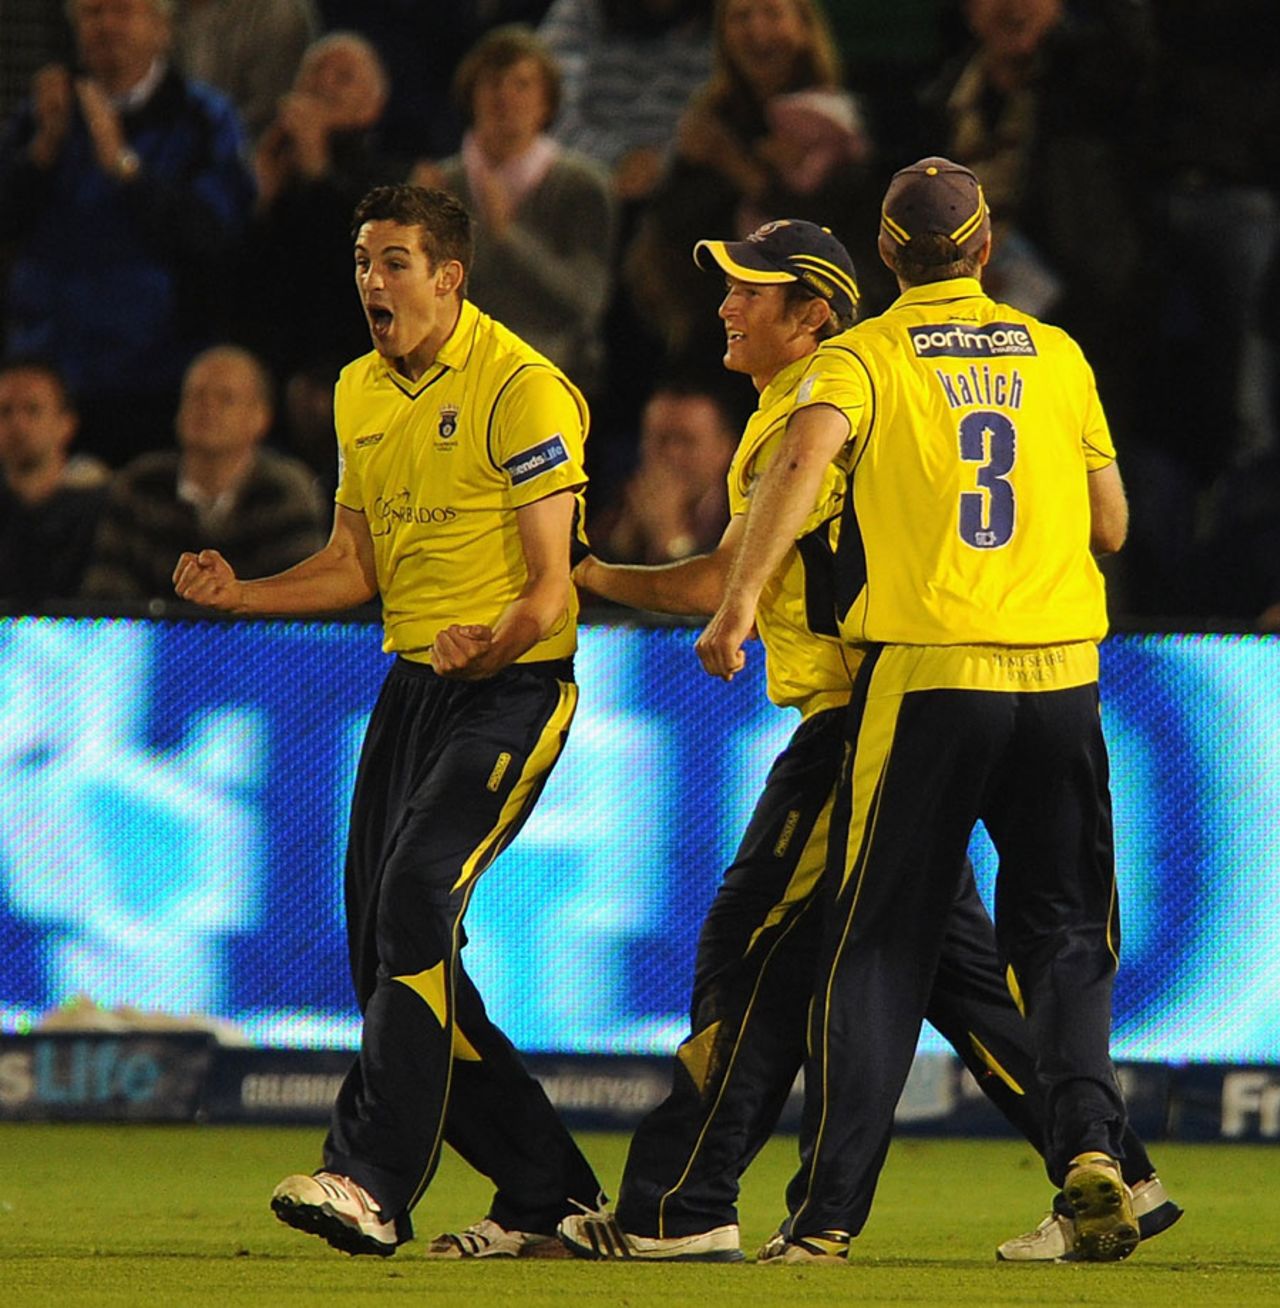 Chris Wood was pumped during his final over, Yorkshire v Hampshire, Friends Life t20 final, August 25, 2012